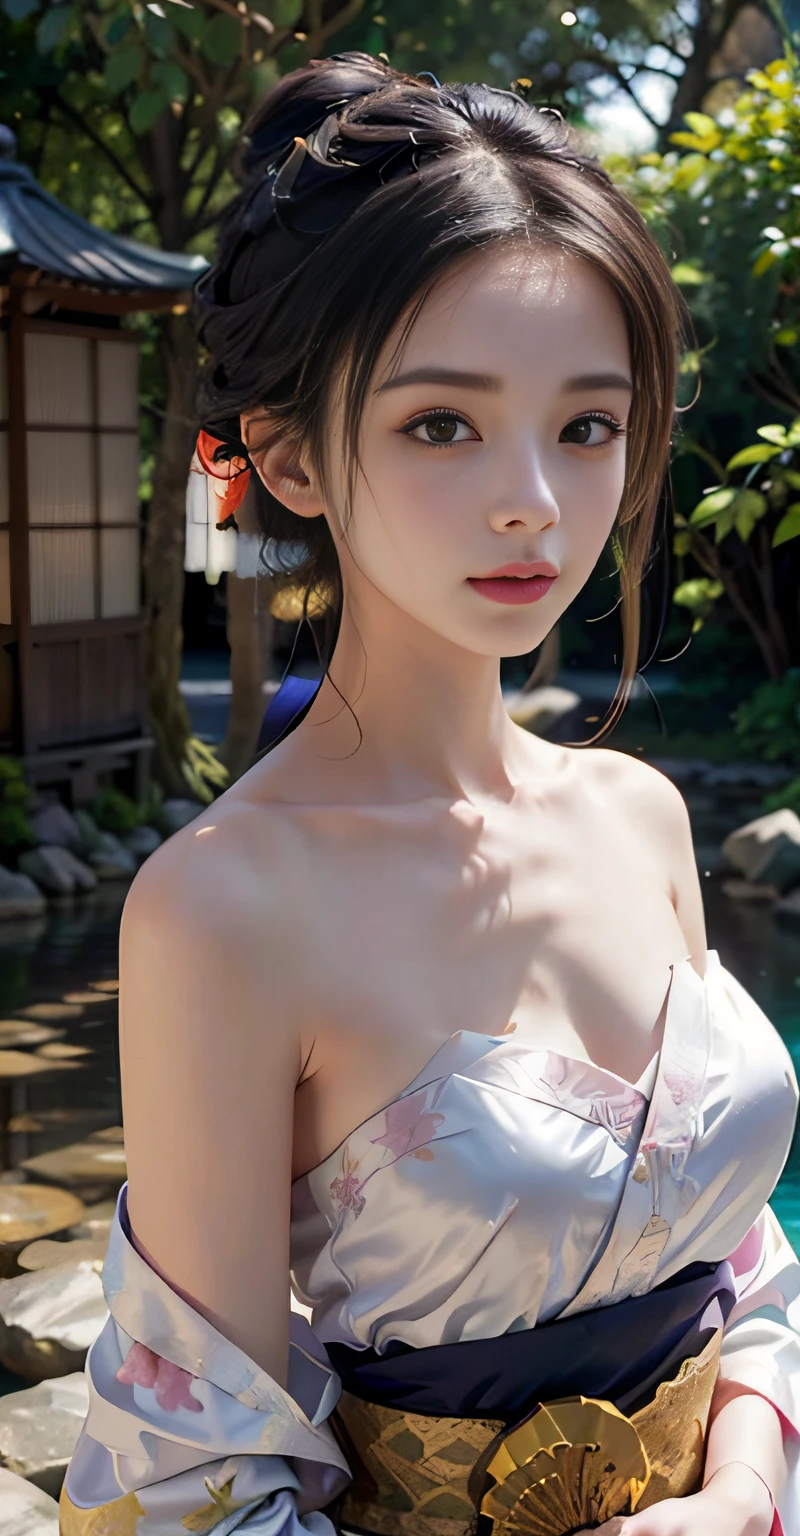 pond, feudal japanese architecture, female, woman, sensual, erotic, looking at viewer, romantic, loving, affectionate, facing viewer, colorful, long hair, (hair up in perfect bun:1.3), (asian:1.3), hair clips, hair bands, ribbons, twilight blue, sparkling silver, galaxy purple, black velvet, cherry blossom park, sakura trees, pink petals, outdoors, standing, (covering breasts:1.4), (hand on breast:1.3), (sunset, dusk:1.25), (silk kimono robe:1.5), (sash:1.3), (bare shoulders:1.4), (strapless:1.3), (delicate embroidery:1.1), elegant, draped, (revealing:0.8), (art by Noah Bradley:1.4), (hand on own chest:1.3), (adult:1.4), , slim waist, small breasts, fcHeatPortrait, (medium shot:1.3), lewd, risque, skimpy, scantily clad, cleavage, (grabbing own breast:1.3), (masterpiece:1.2), subsurface scattering, heavy shadow, (high quality:1.4), golden ratio, (intricate, high detail:1.2)